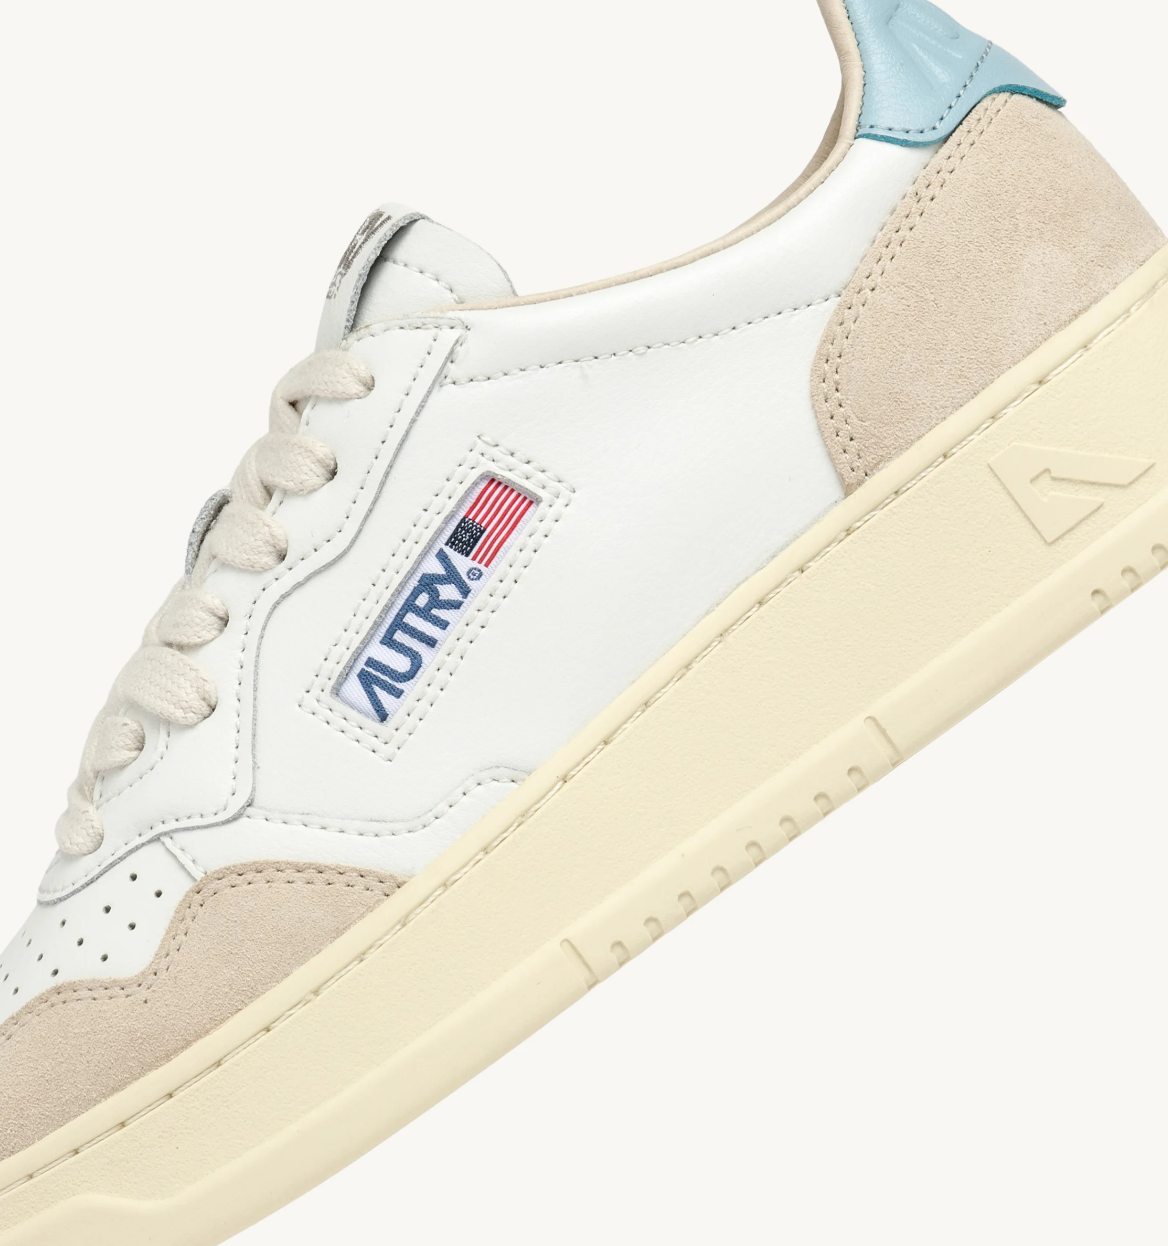 MEDALIST LOW LS69 LEATHER/SUEDE WHITE/ST BLUE